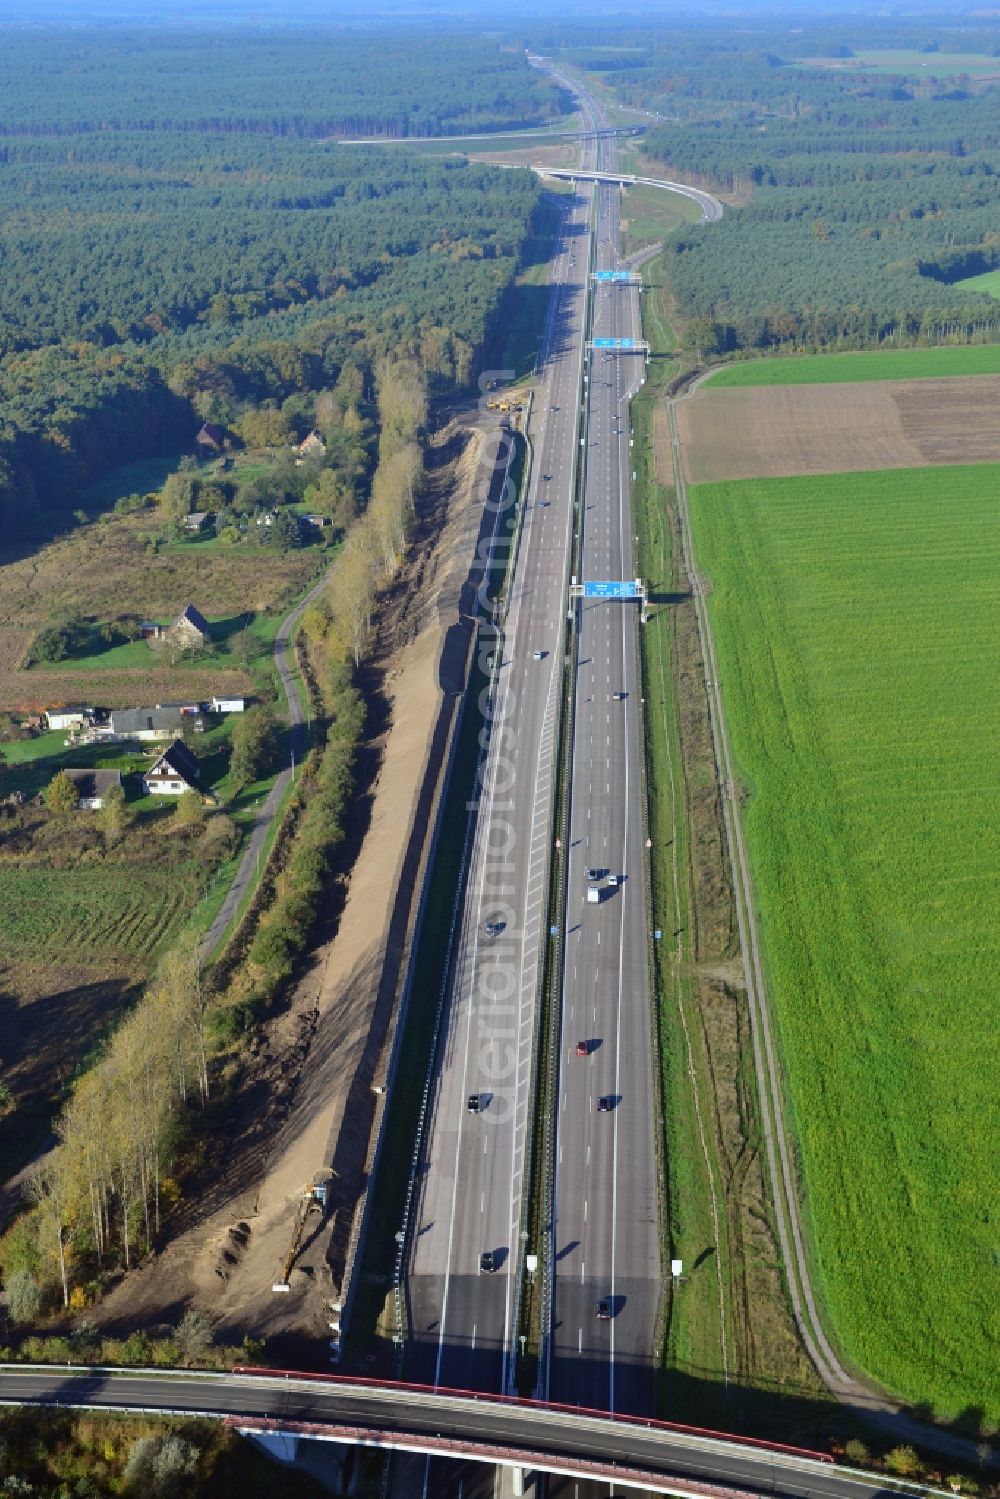 Aerial image Neu Vehlefanz - Construction site of the junction Havelland at the motorway A10 and A24 in the state Brandenburg